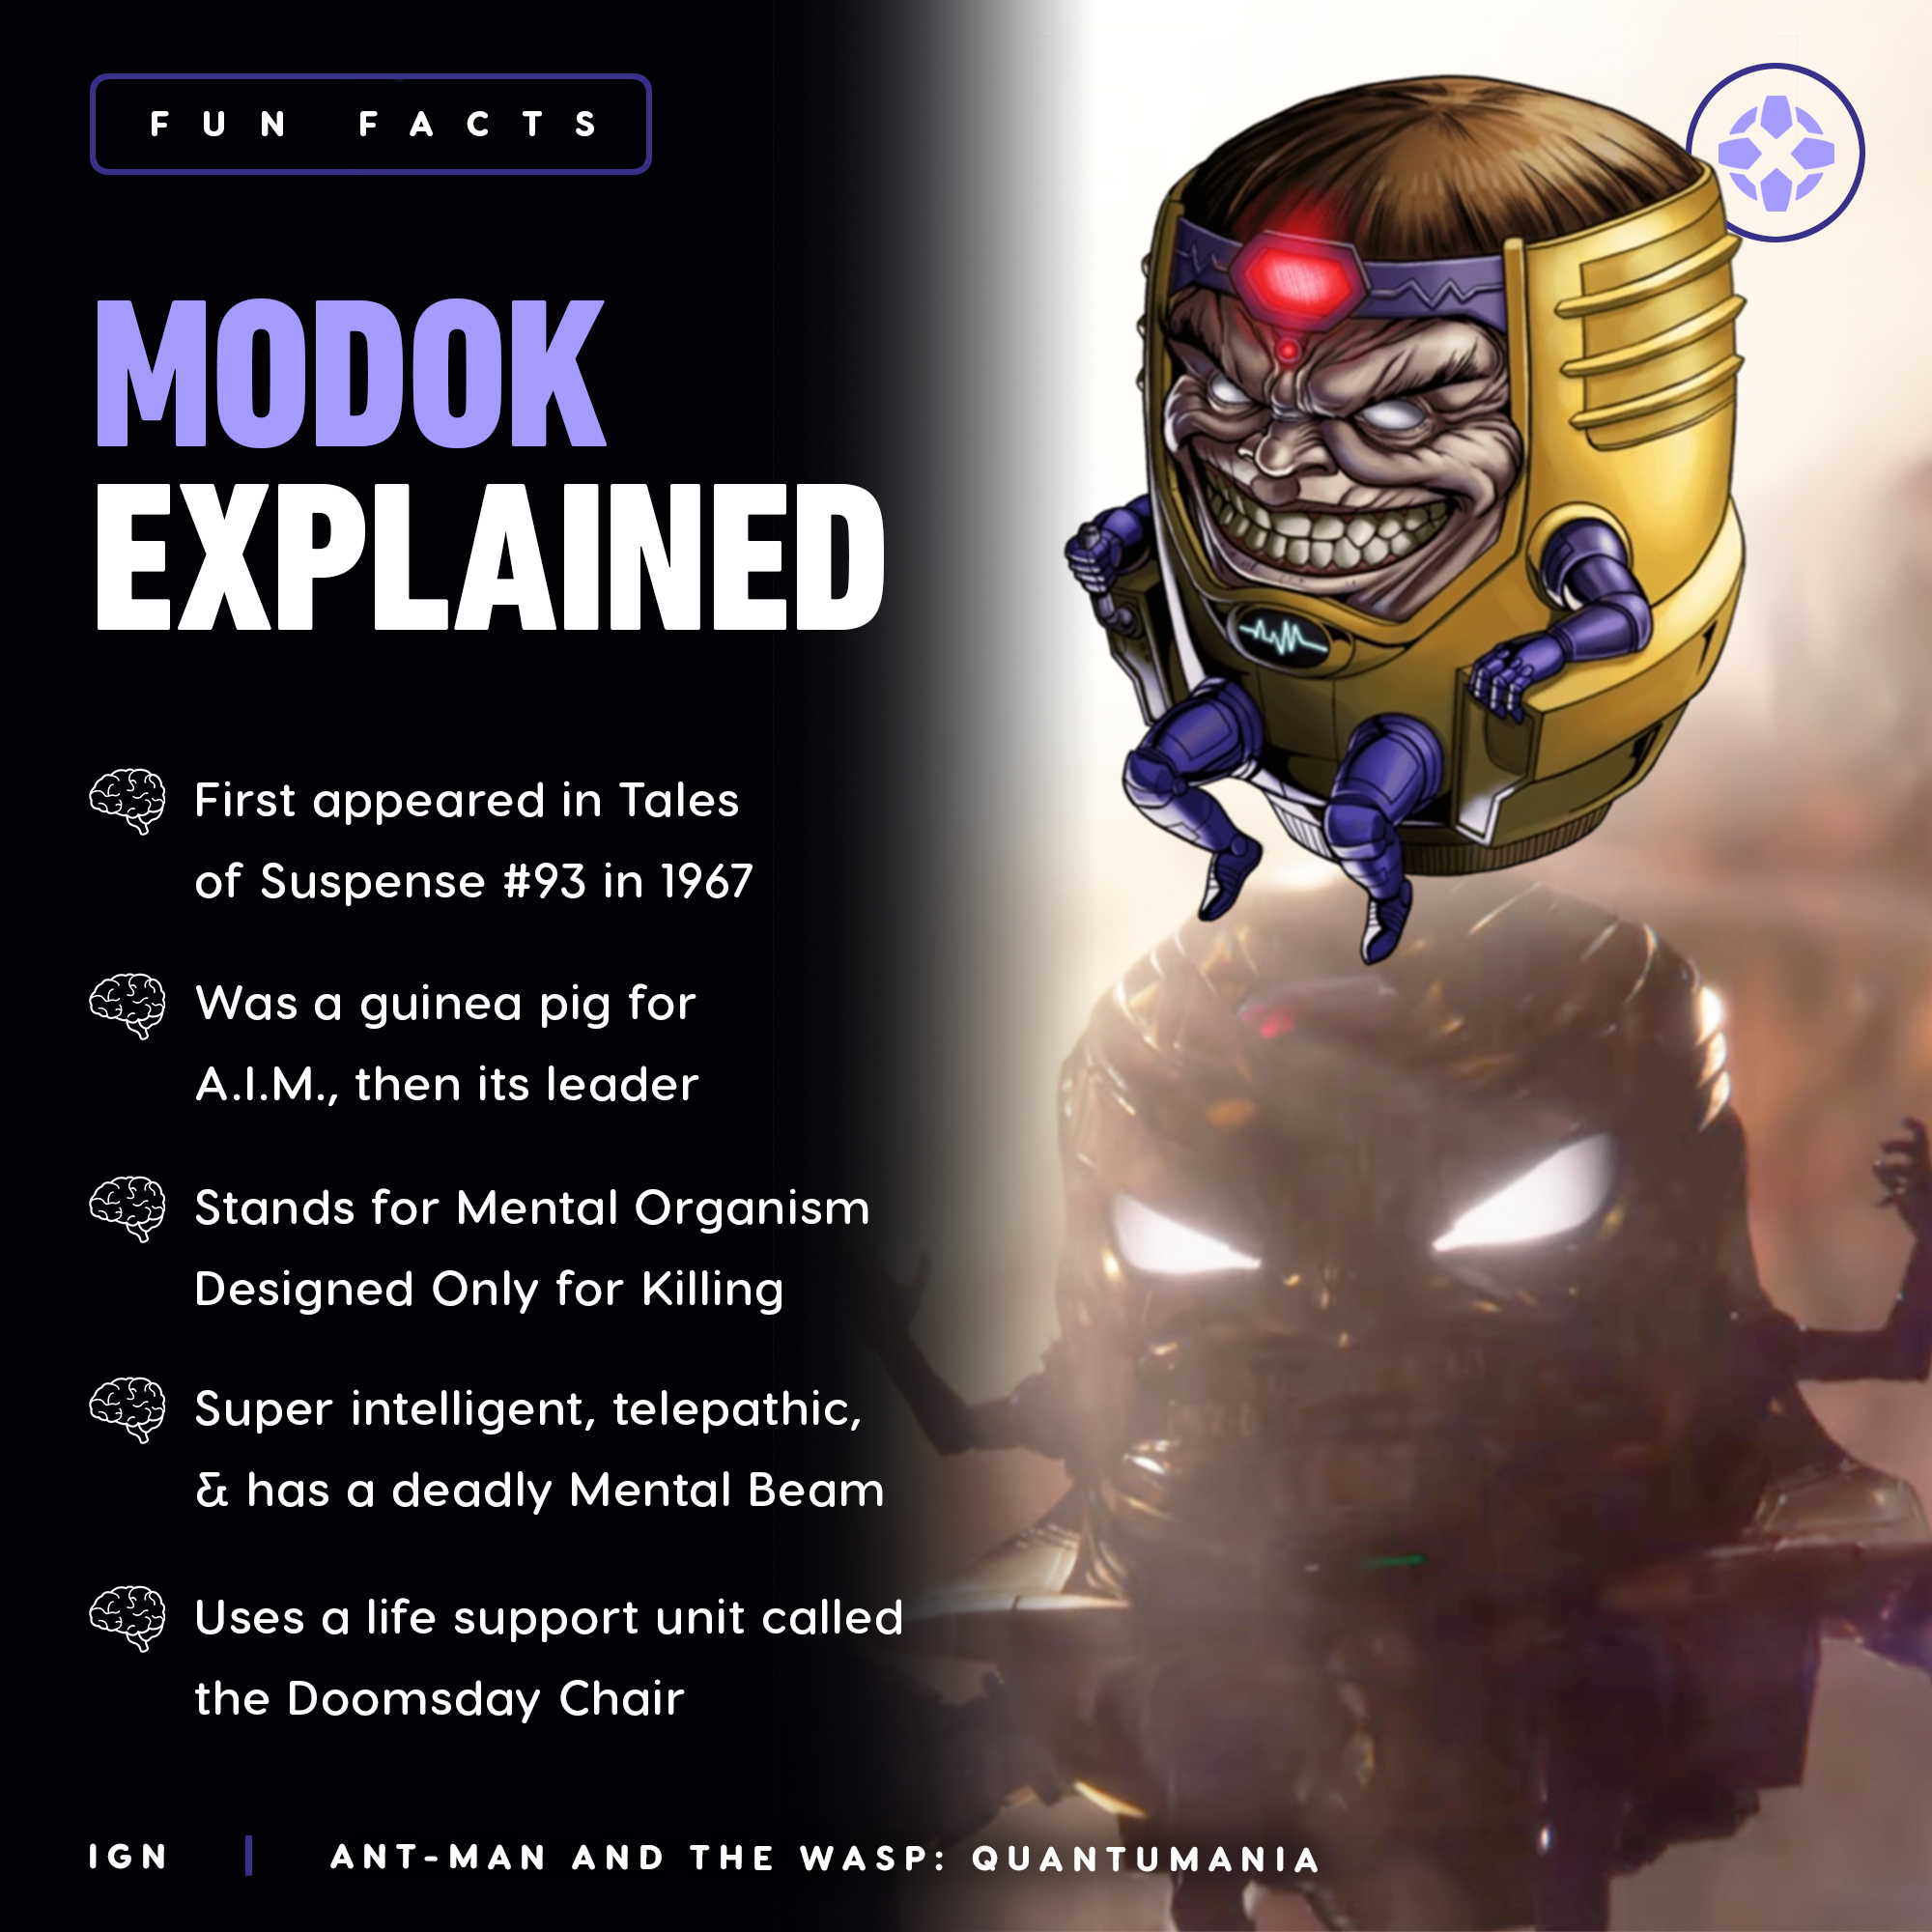 IGN on Twitter: "One of Marvel's wildest and most maniacal villains, MODOK, will make his debut in Ant-Man and the Wasp: Quantumania. Here's everything you need to know about the giant floating